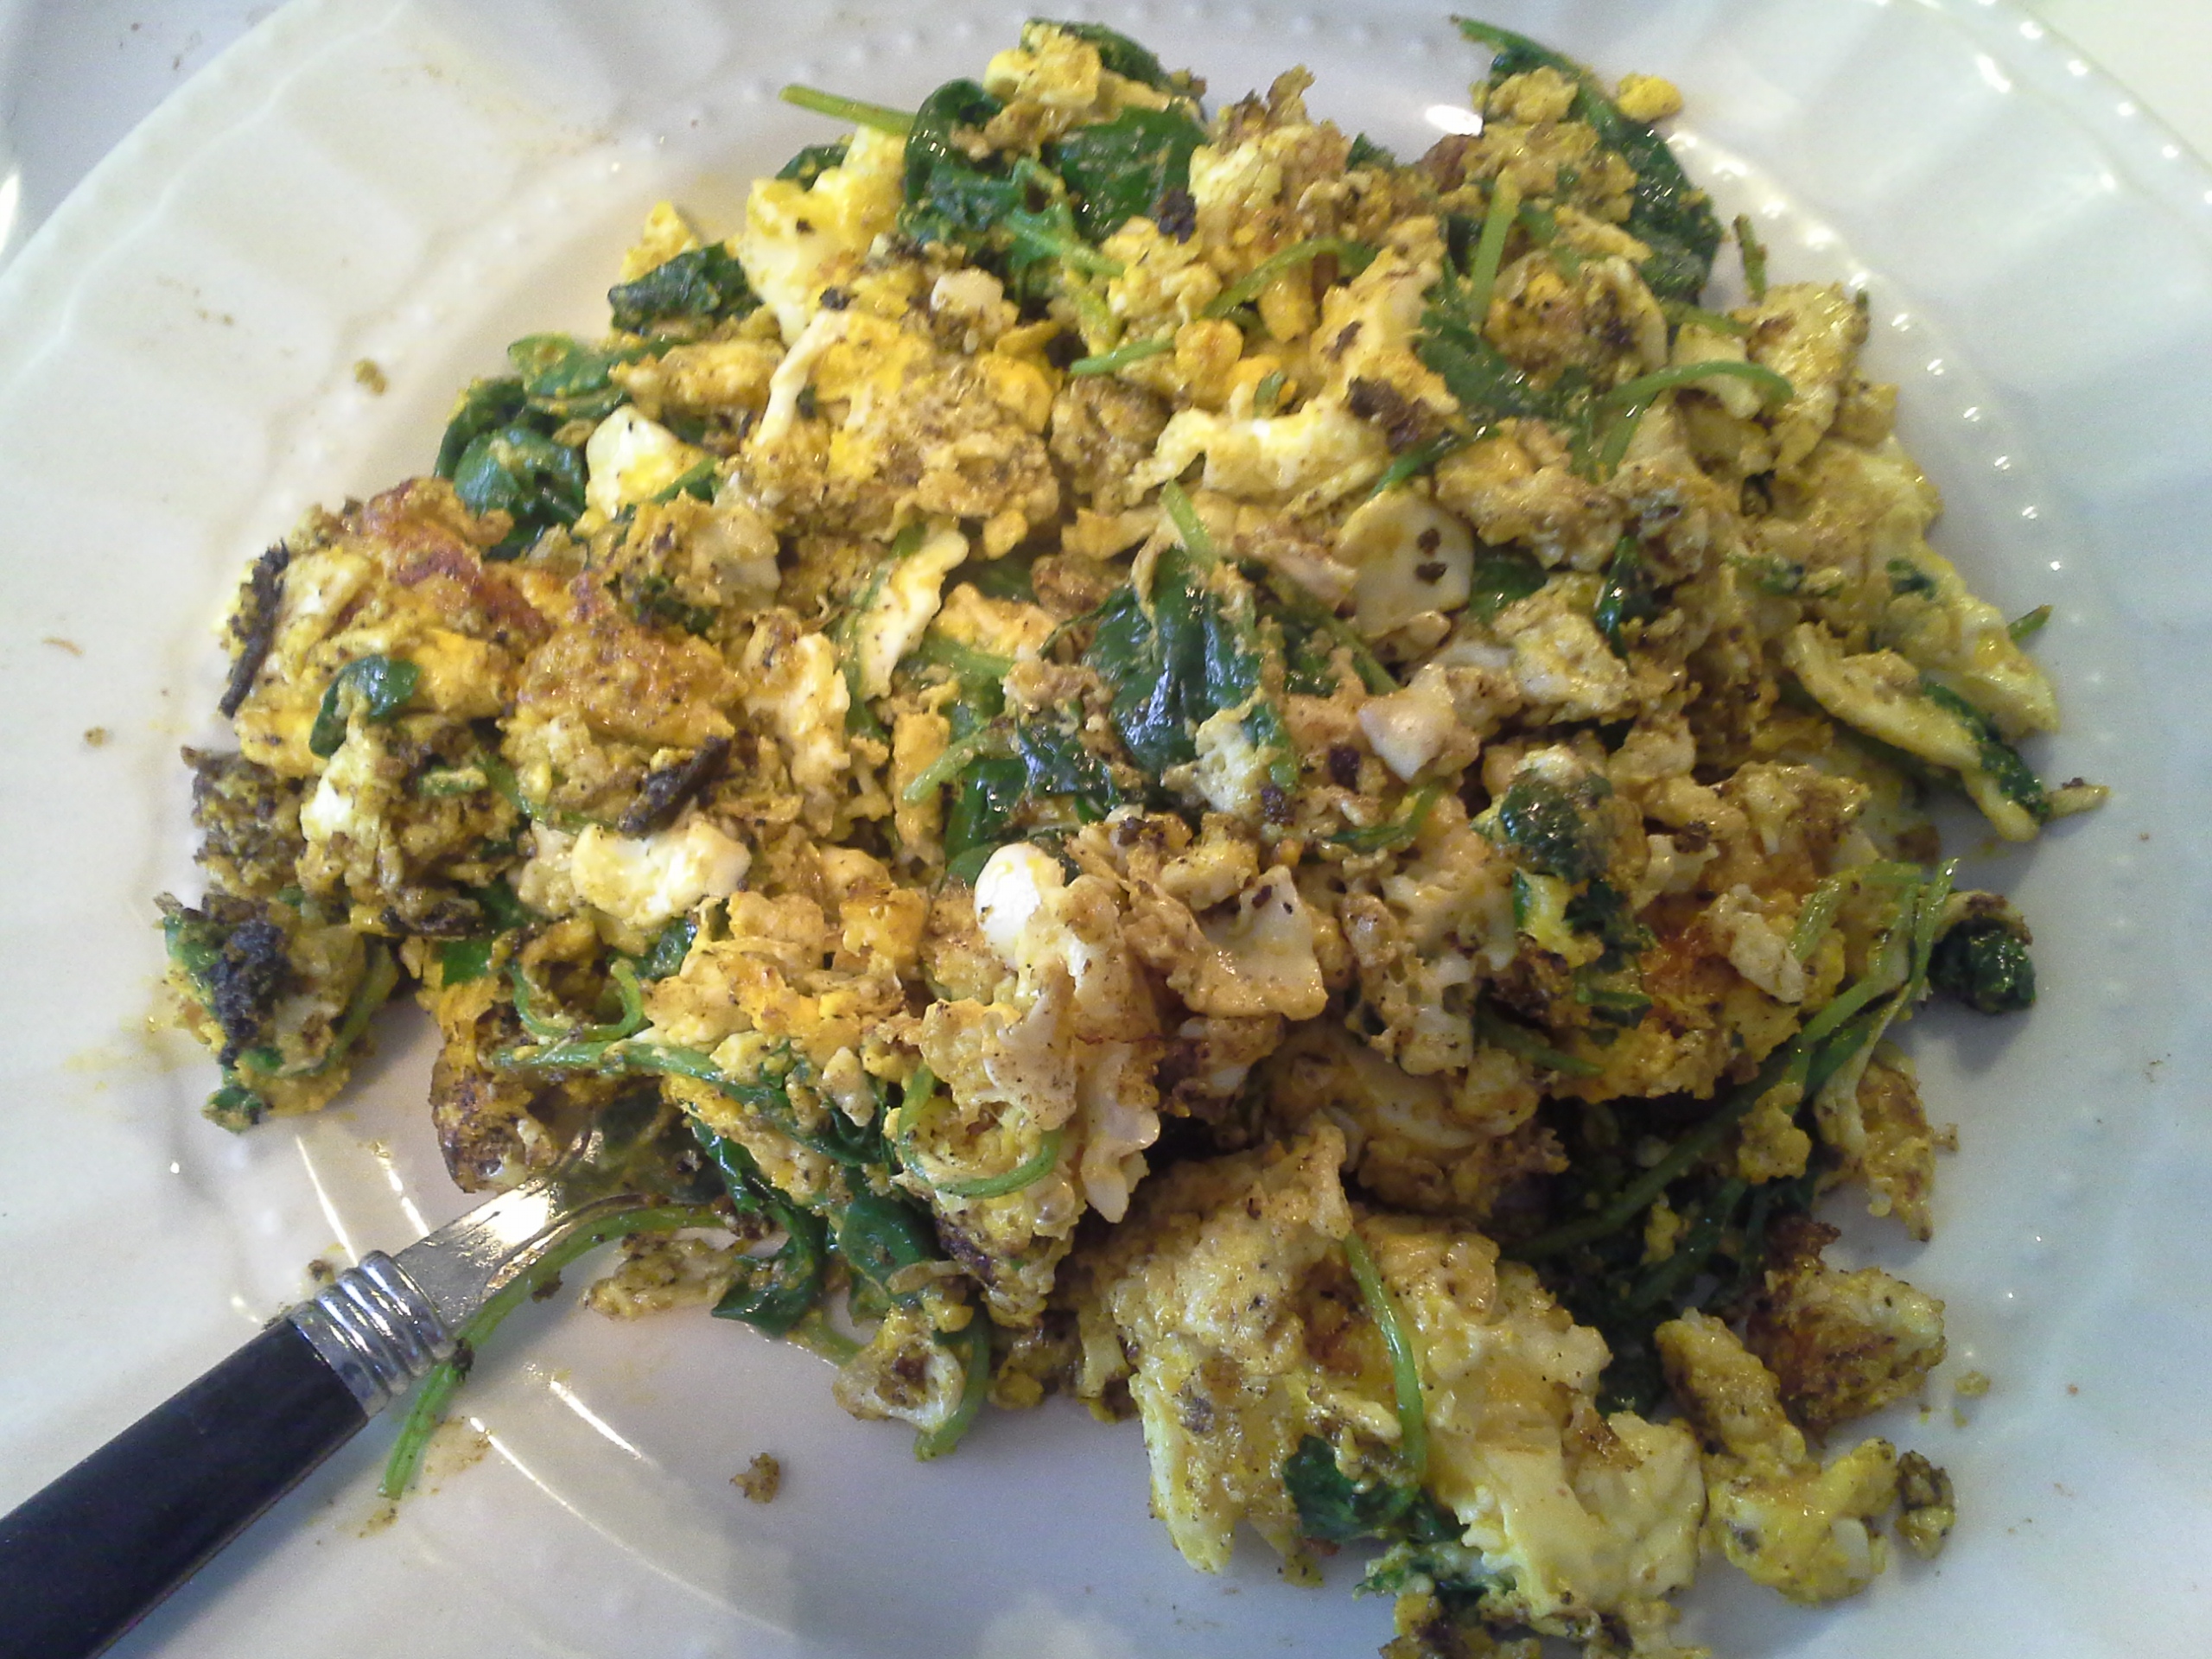 Lunch: 2:05 p.m. | 4 eggs, 2 oz. baby kale, 2 Tbsp. red palm oil, herbs & spices